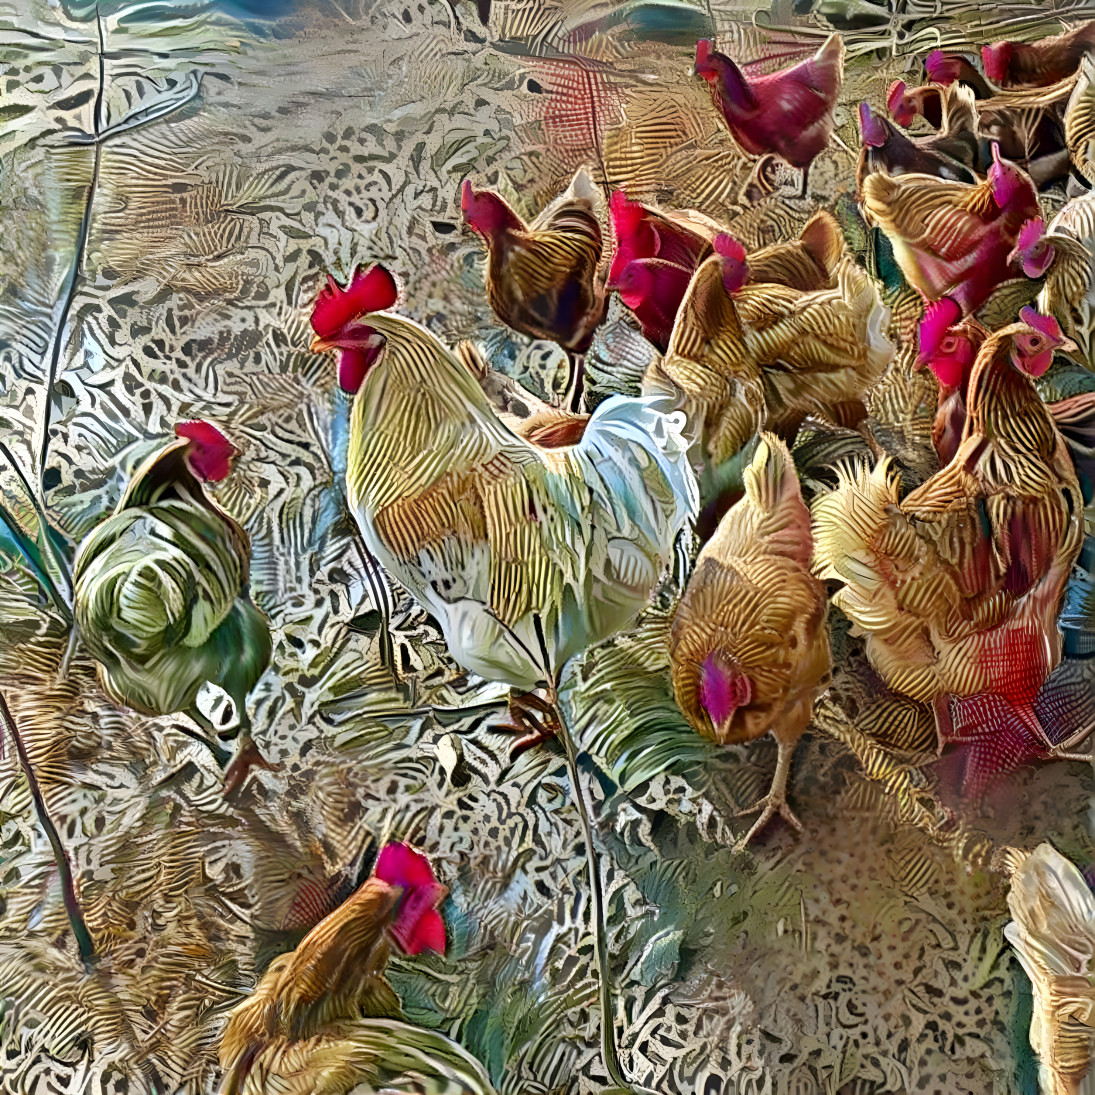 Rooster with his harem